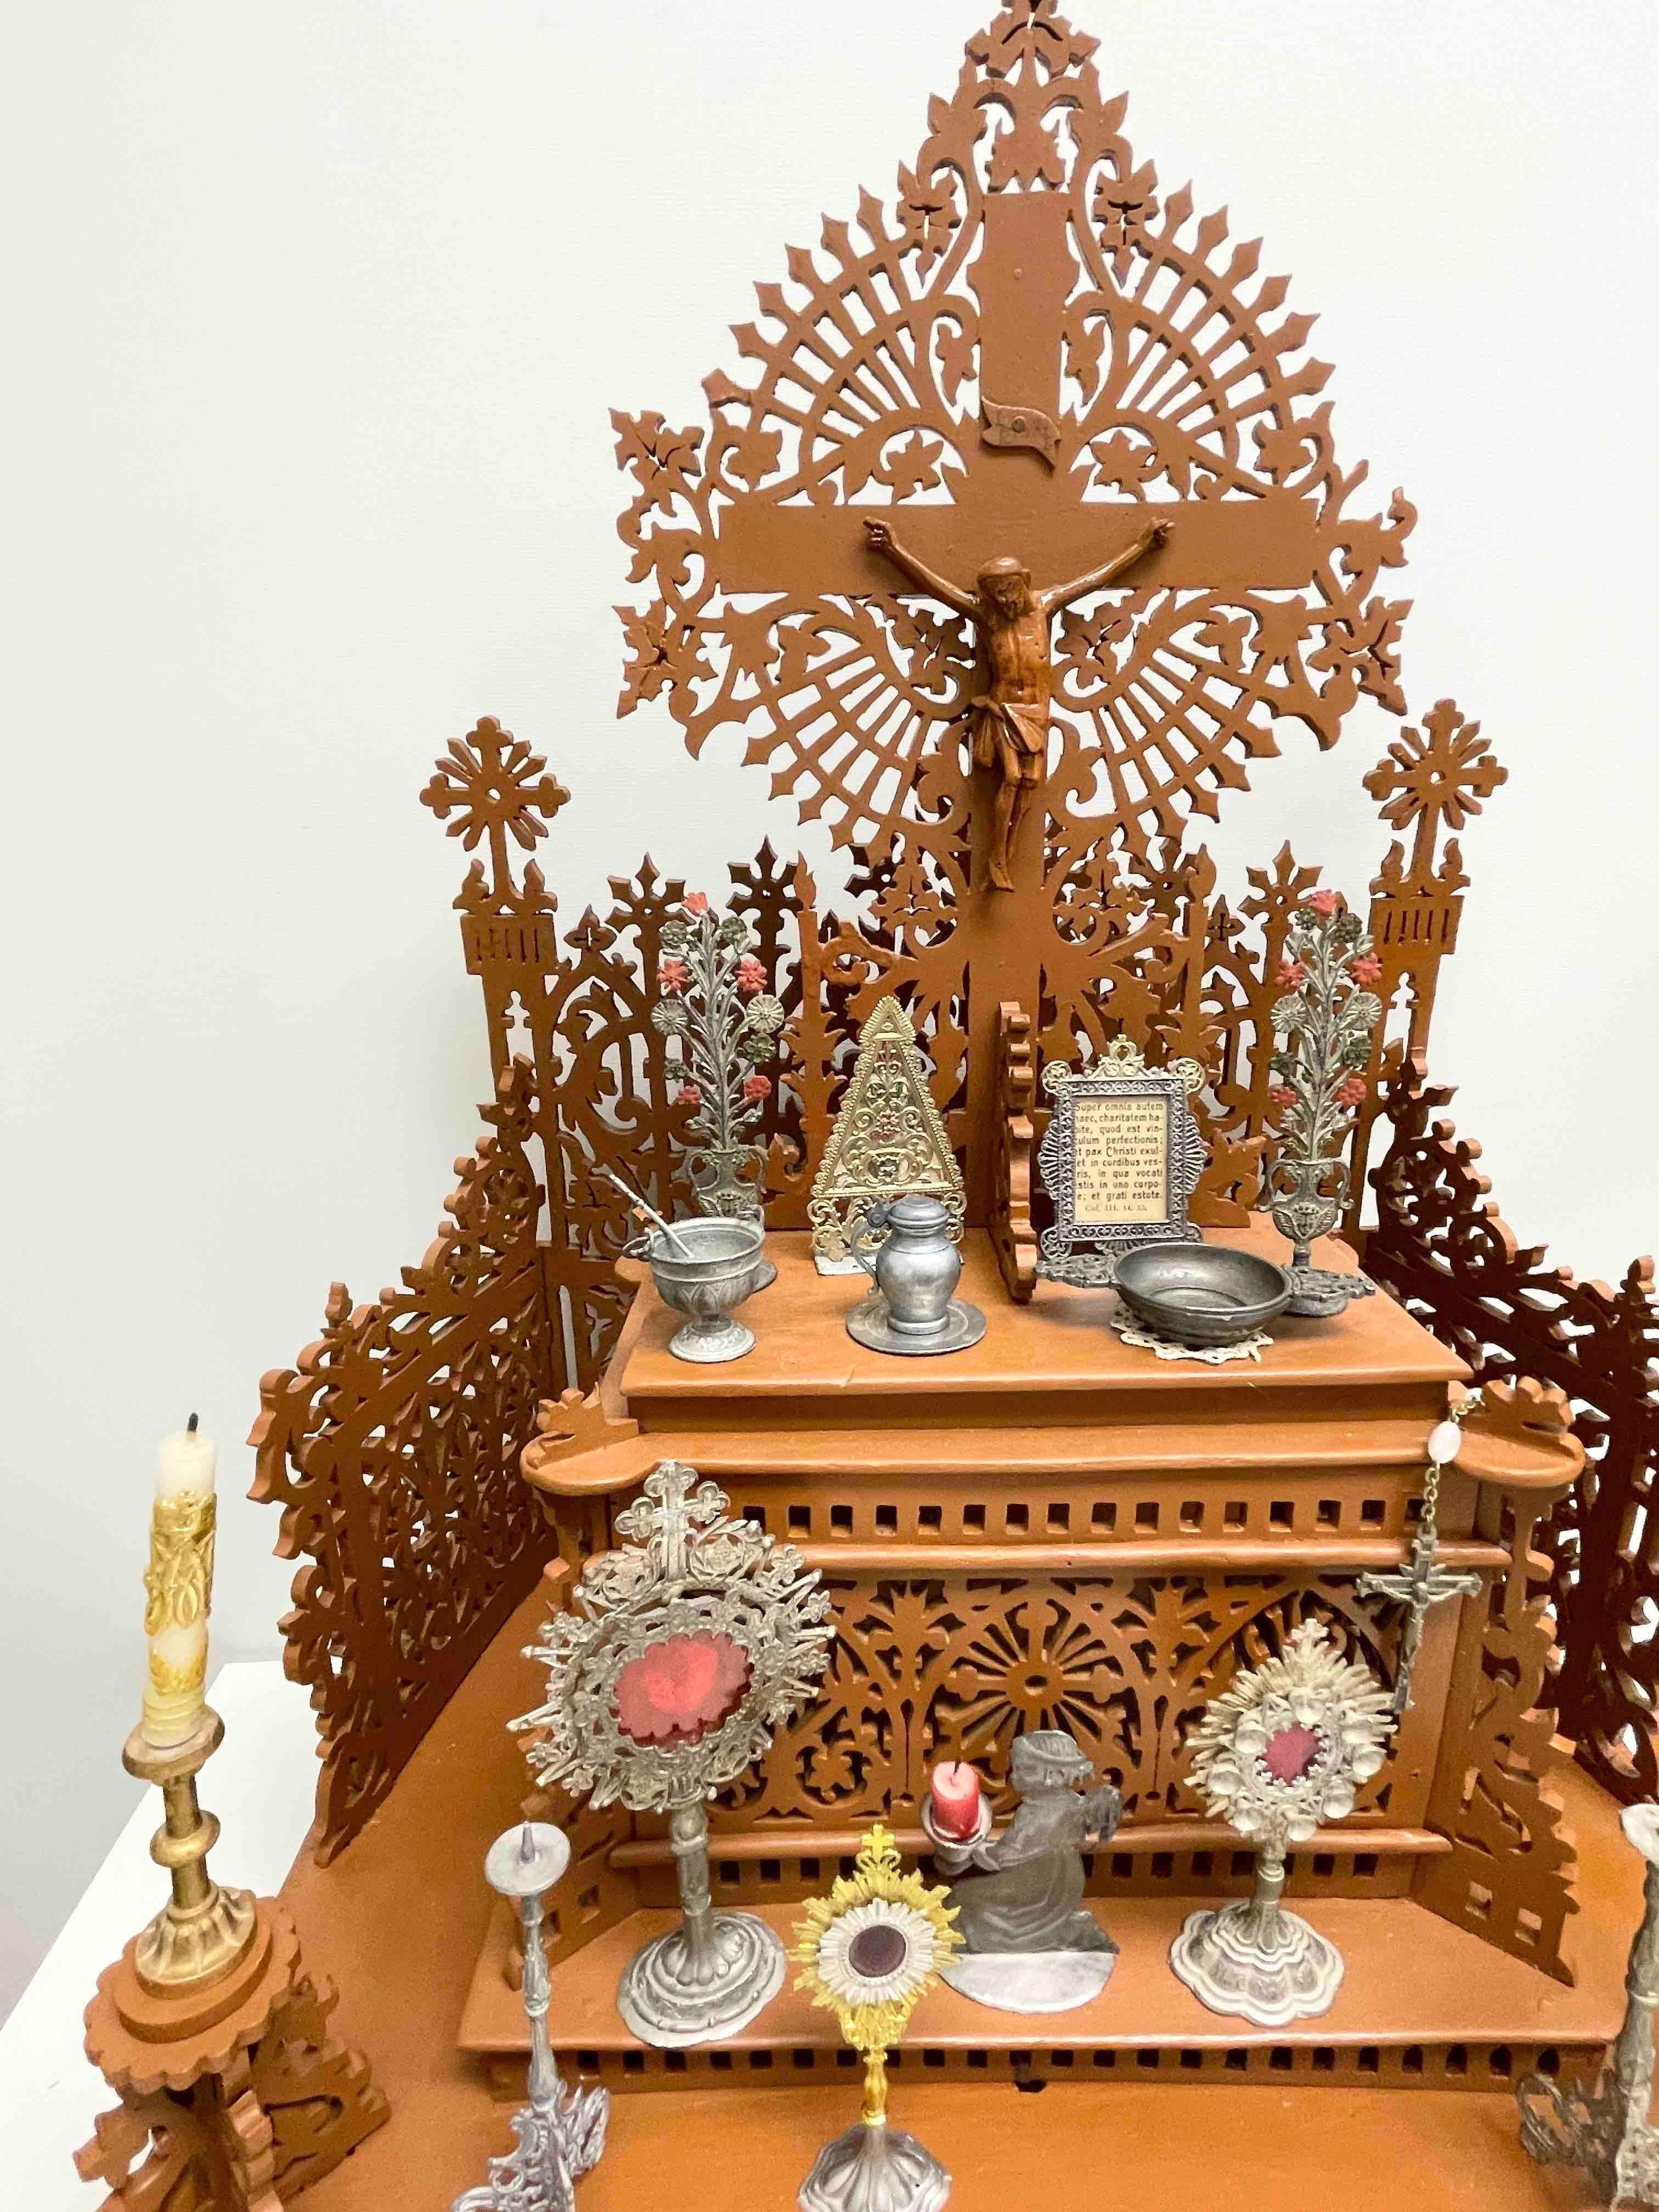 Hand-Crafted Wood Fretwork House Altar with Accessories Black Forest Folk Art 1900s For Sale